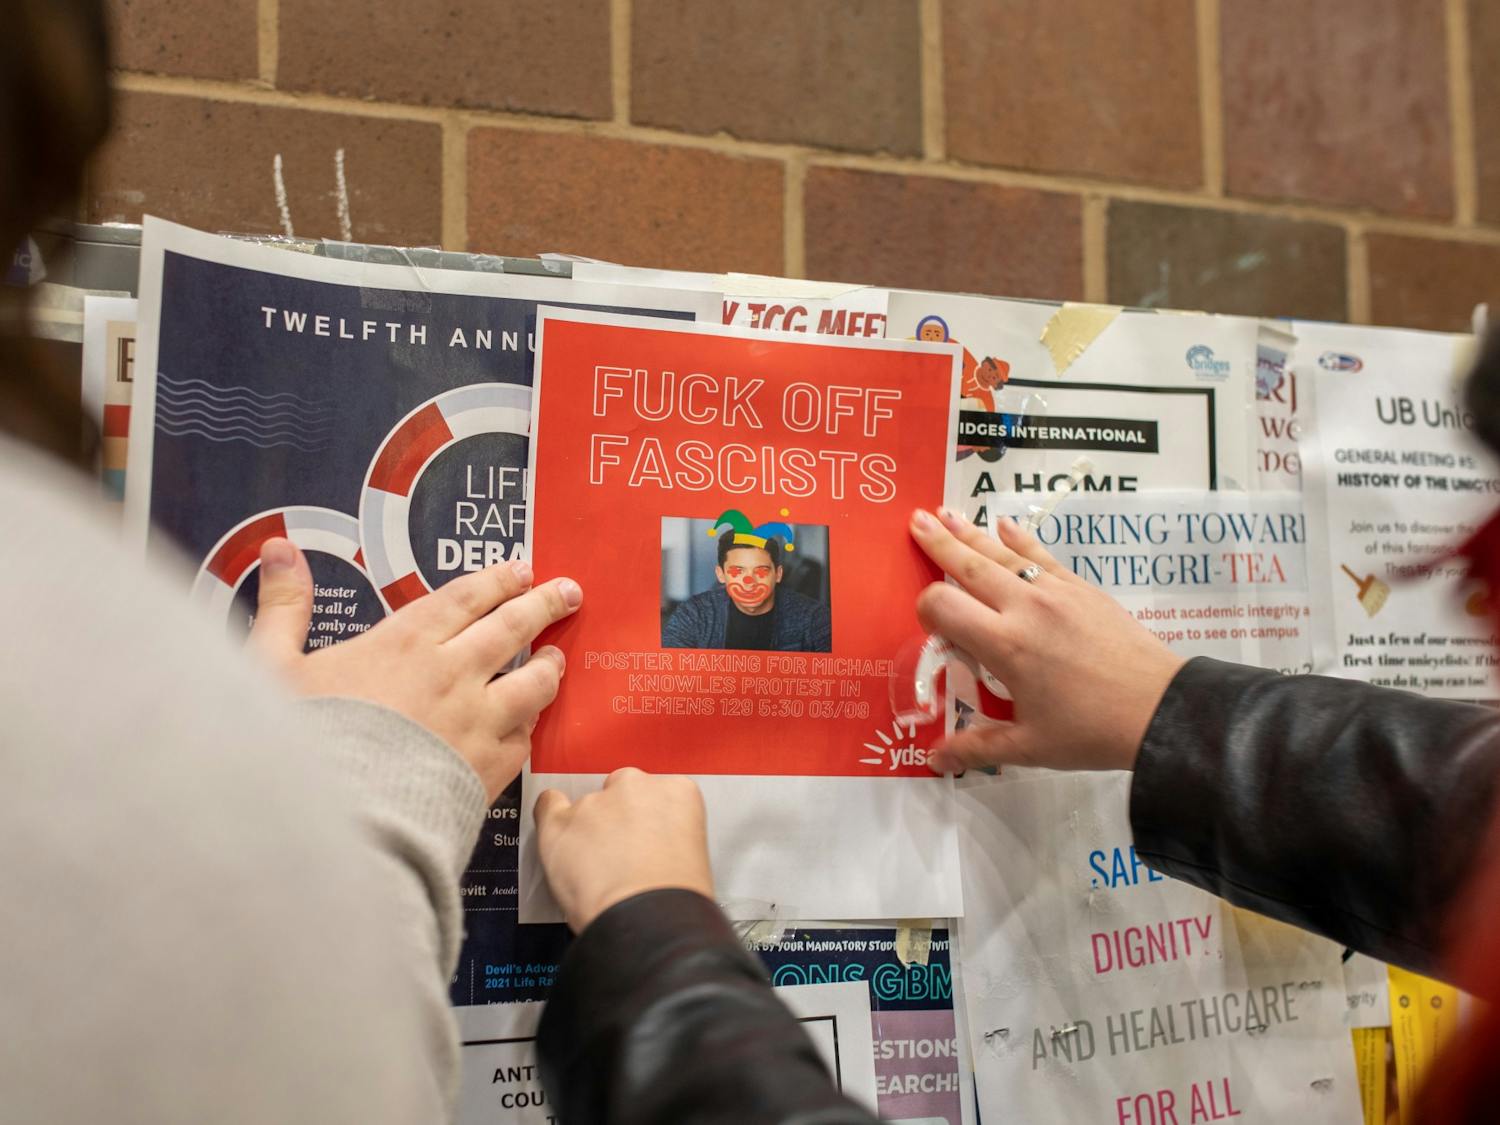 Some queer UB students are encouraging people to protest ahead of Michael Knowles’ speech in Slee Hall Thursday.